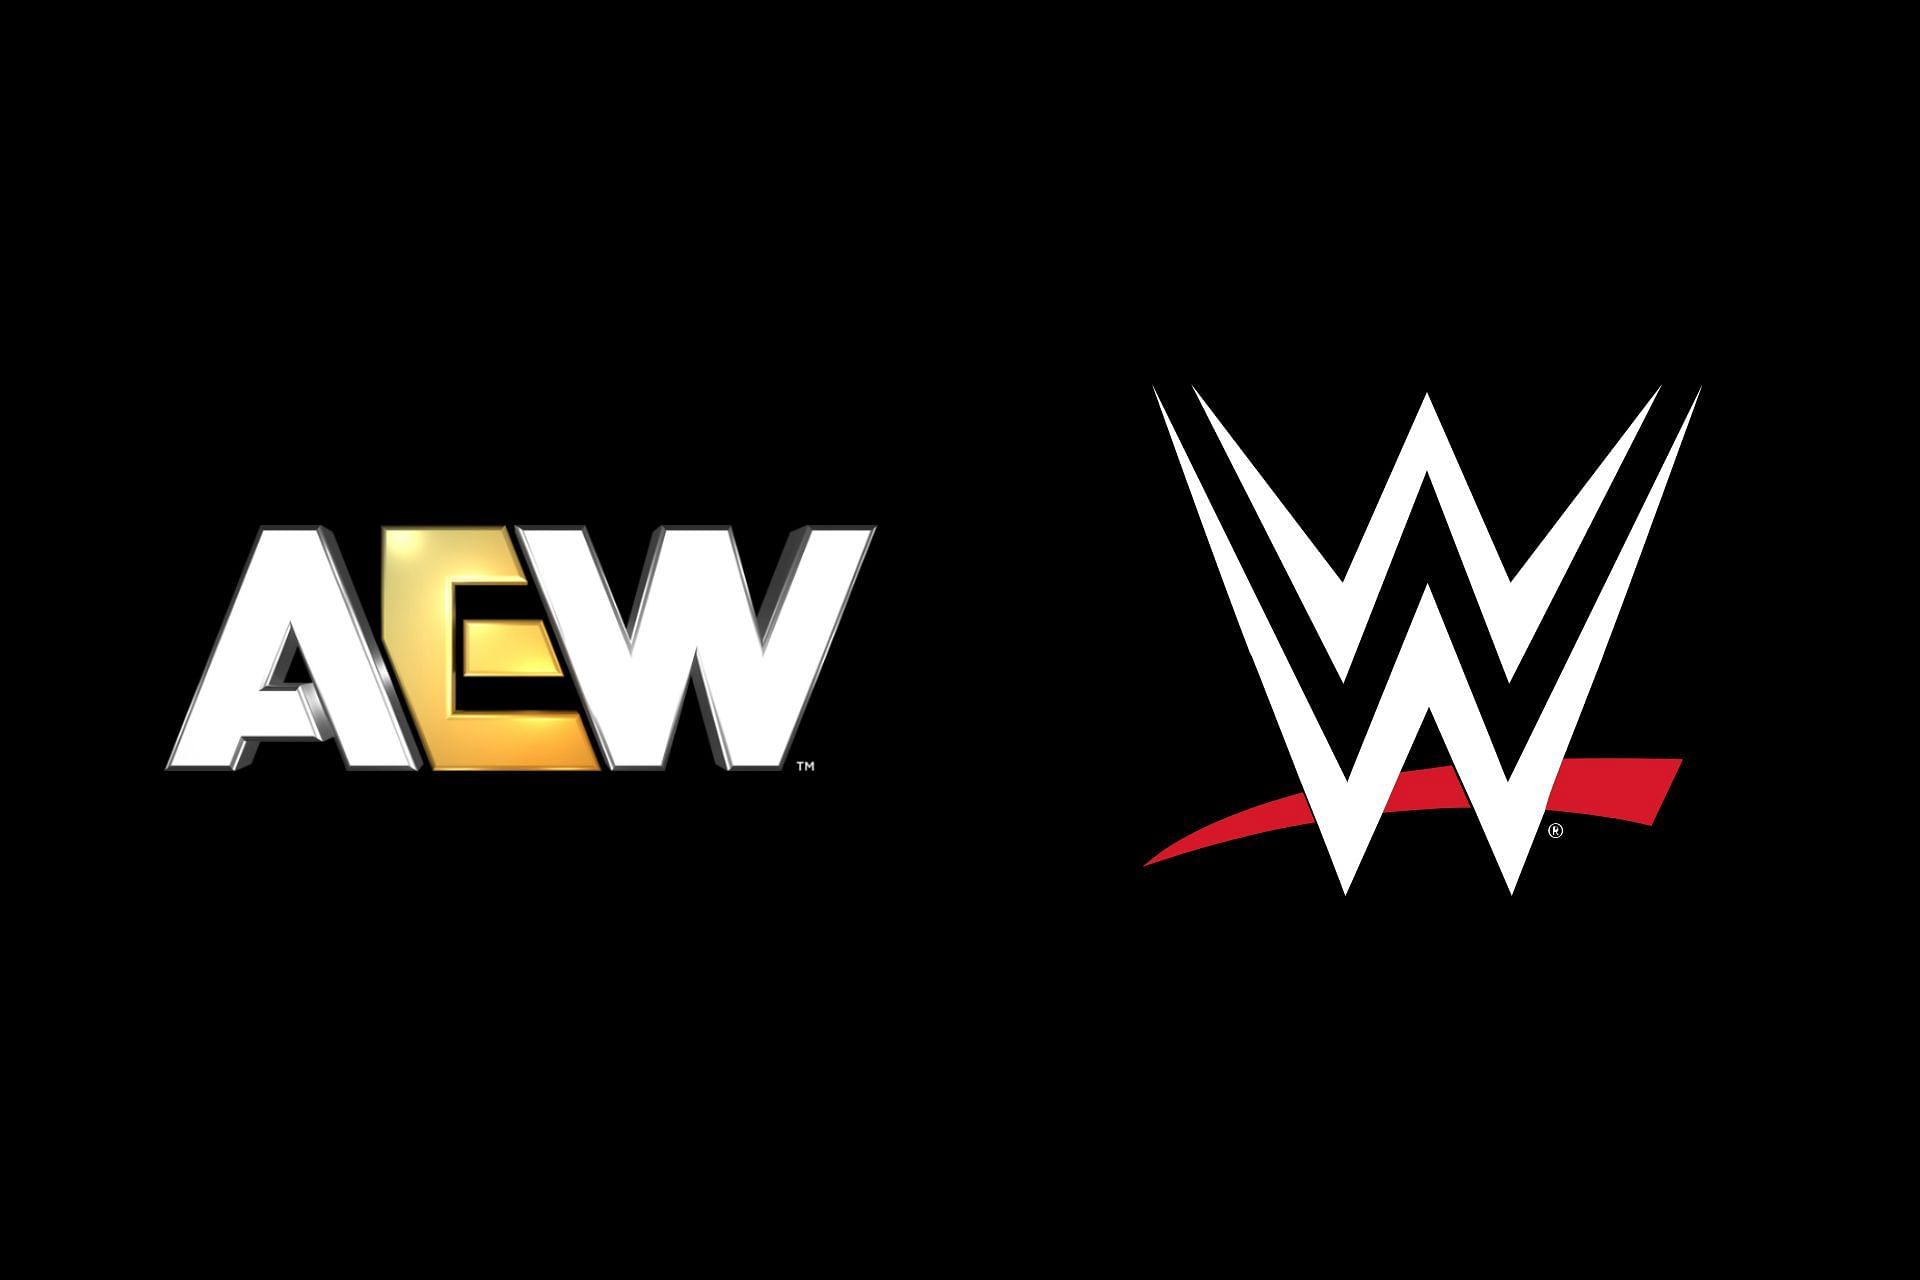 AEW has signed another former WWE talent, but not on the roster this time [Image Source: AEW Facebook and WWE.com]